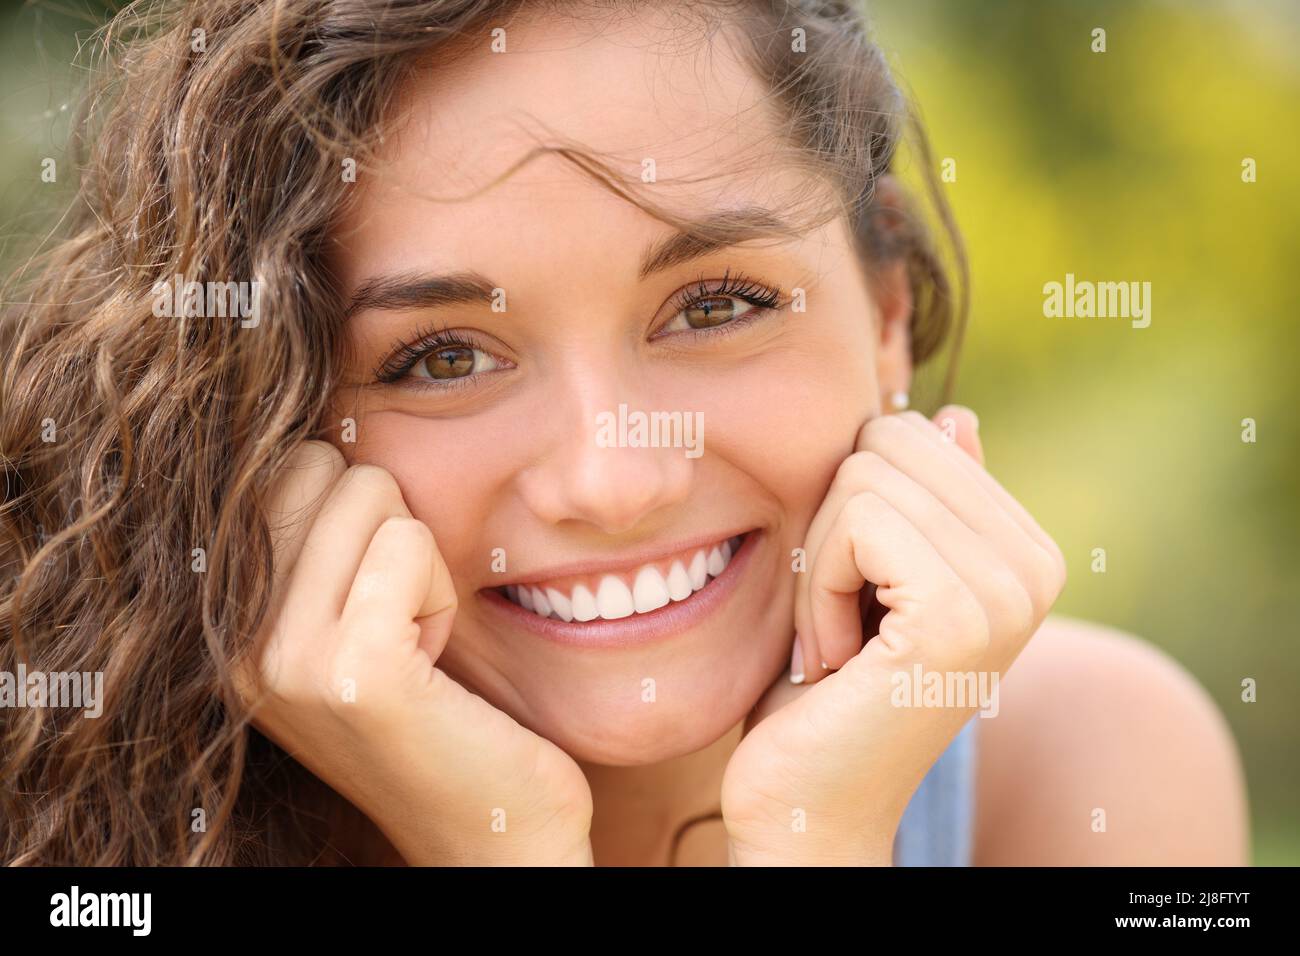 Front view portrait of a beautiful woman with perfect white smile looking at camera in a park Stock Photo